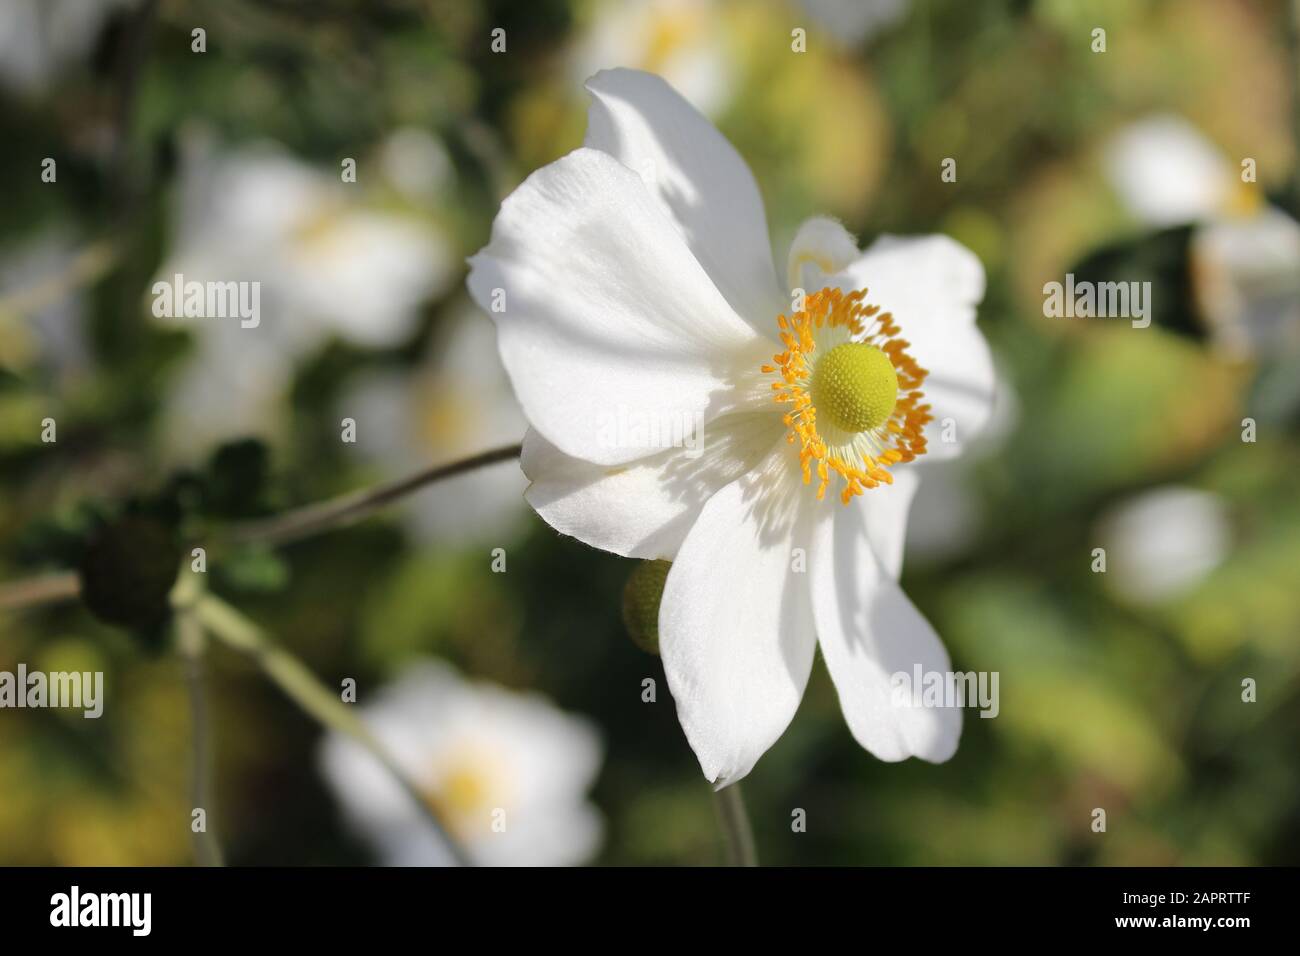 Selective focus shot of a beautiful with white harvest anemone flower a blurred background Stock Photo